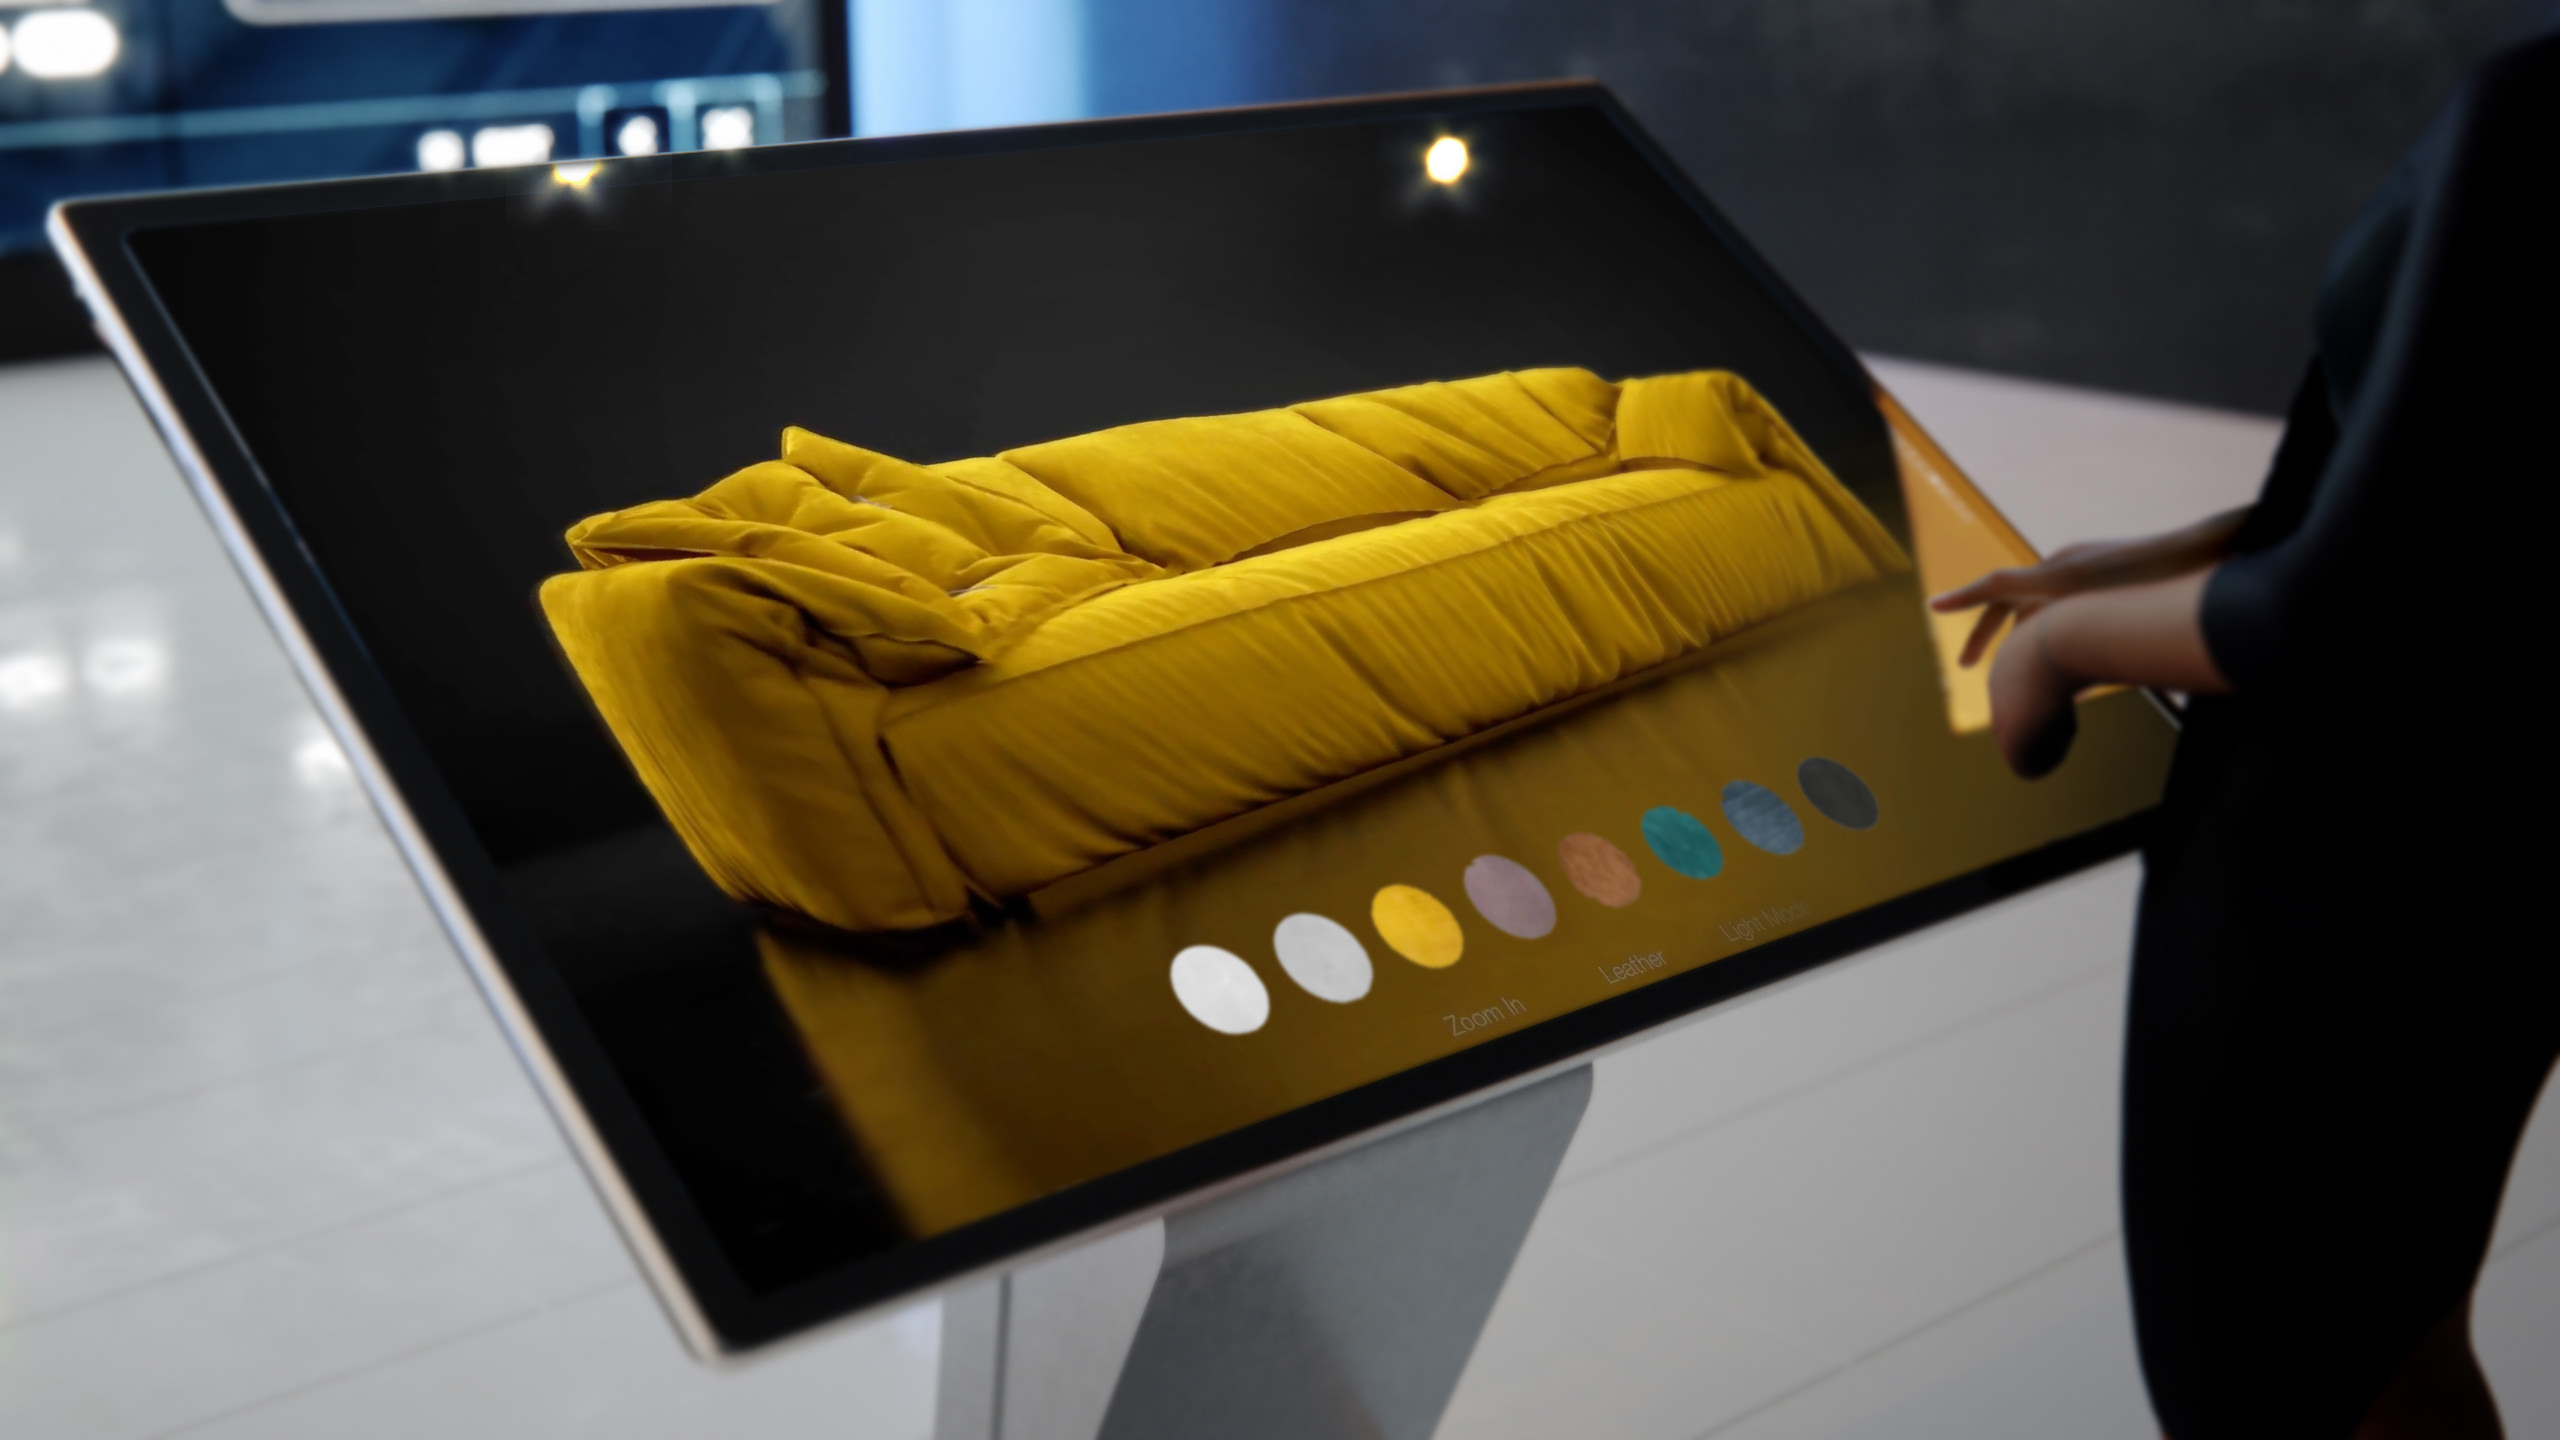 A modern interactive touchscreen displaying a yellow singe cushion sofa in the dark studio lighting and a toolbar that shows possible modes to apply for e-commerce business or online shop